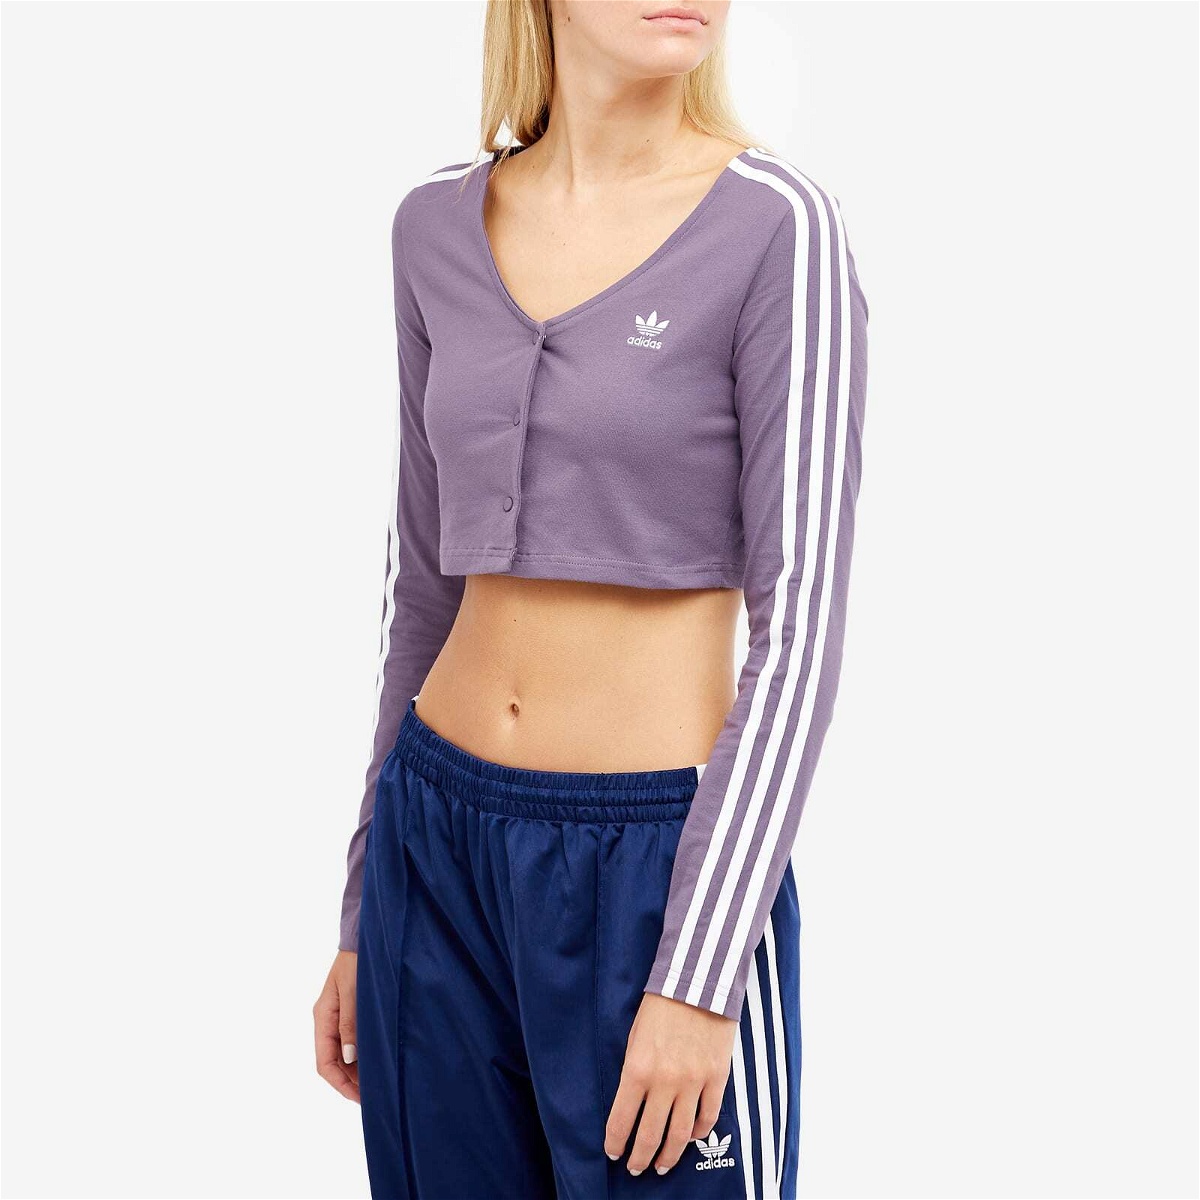 Adidas Women\'s Long Sleeve T-Shirt Violet in adidas Shadow Button